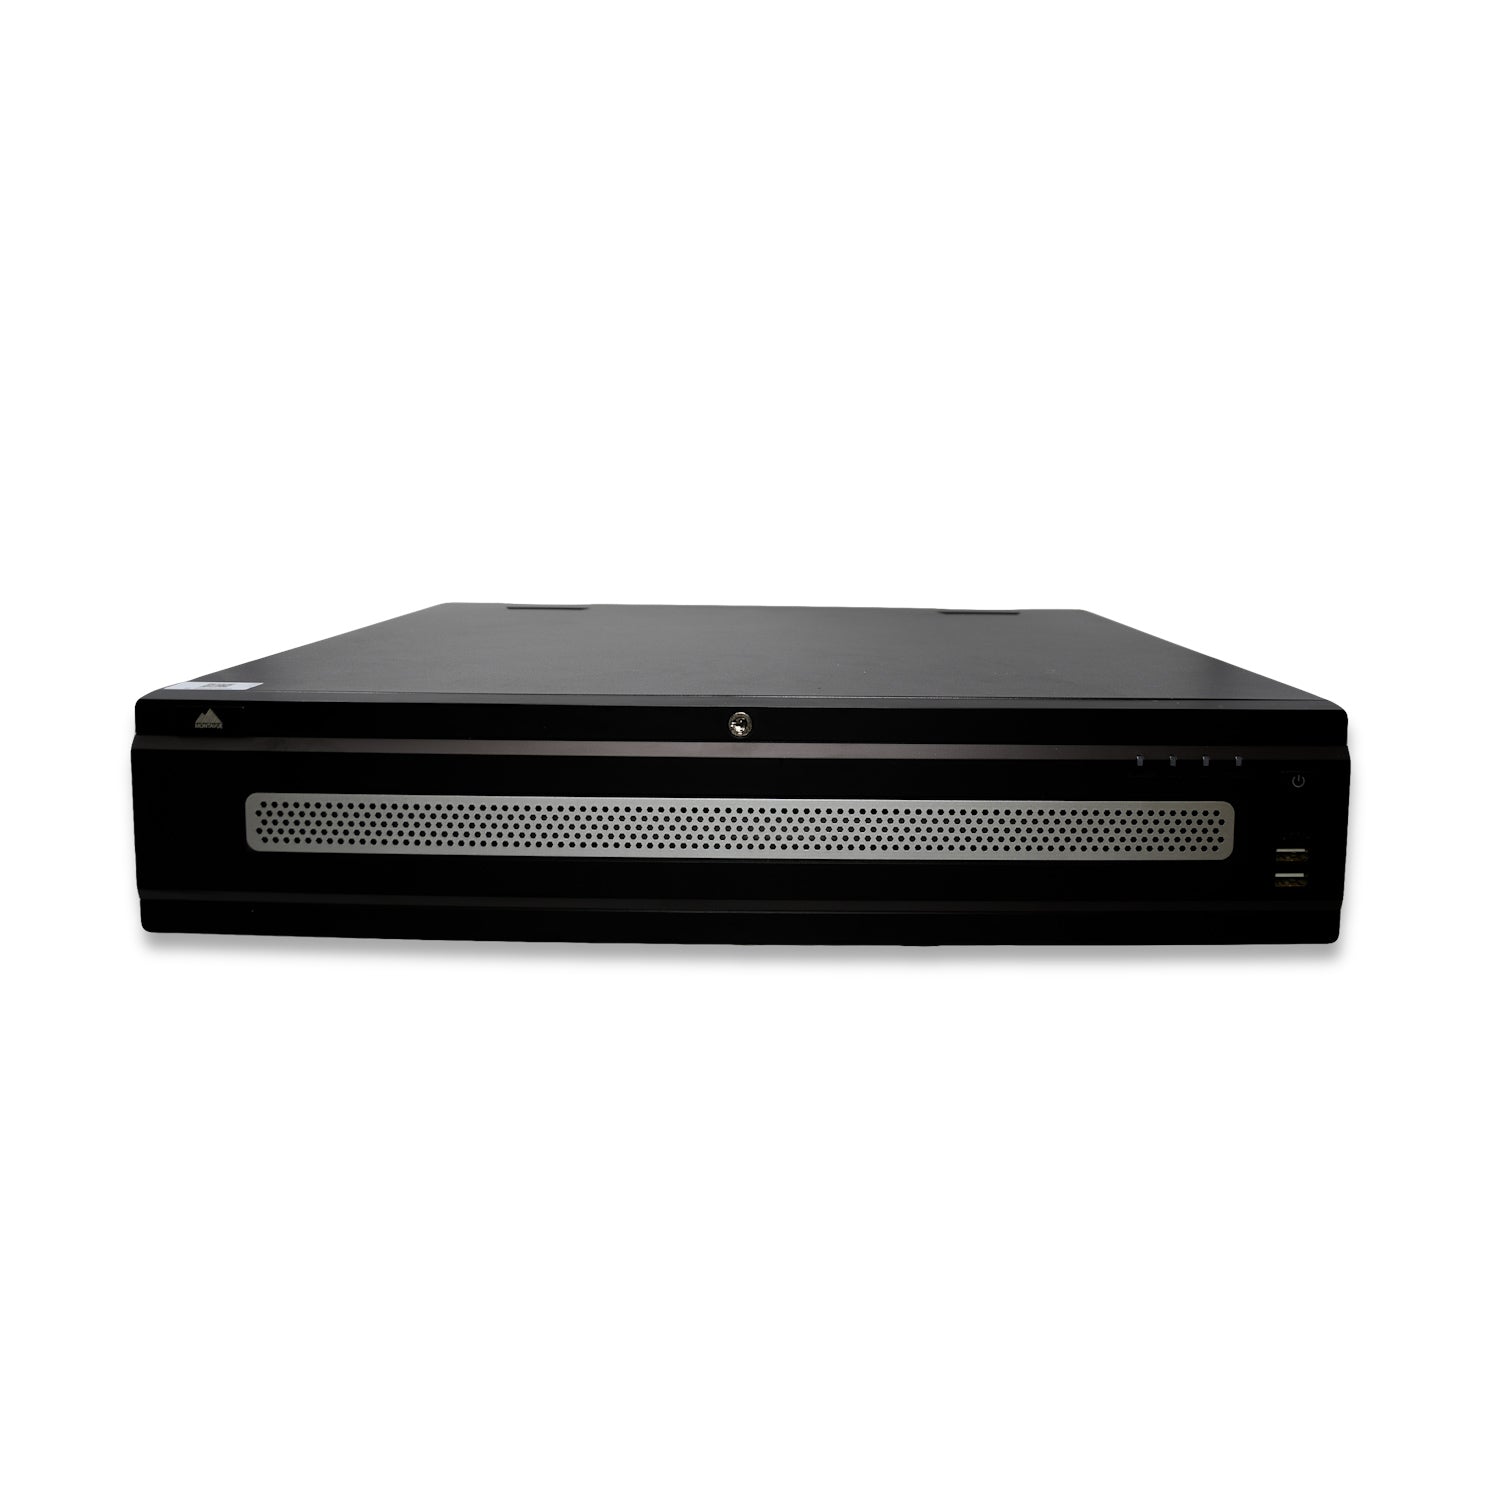 MNR68128-AI | 128 Channel 4K H.265+ Ultra-AI NVR with 160TB (8x20TB) HDD Max Internal Capacity, eSATA Expandable - HDDs Not Included - Montavue